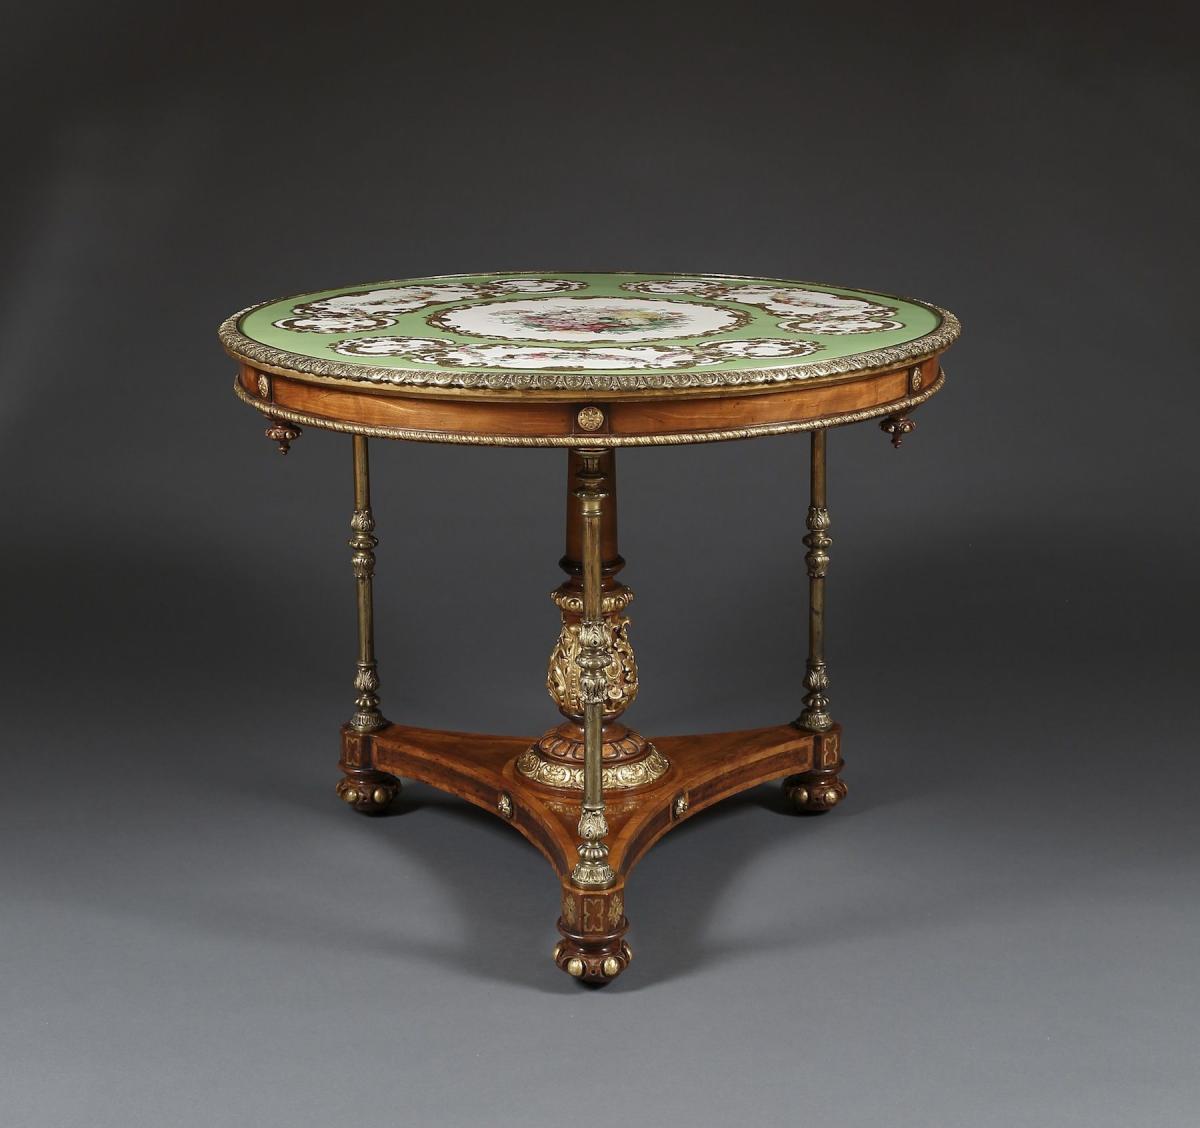 A Satinwood And Gilt-Brass Mounted Circular Center Table Bearing An Exquisite 'Adelaide Green' Porcelain Top By Copeland & Garrett  